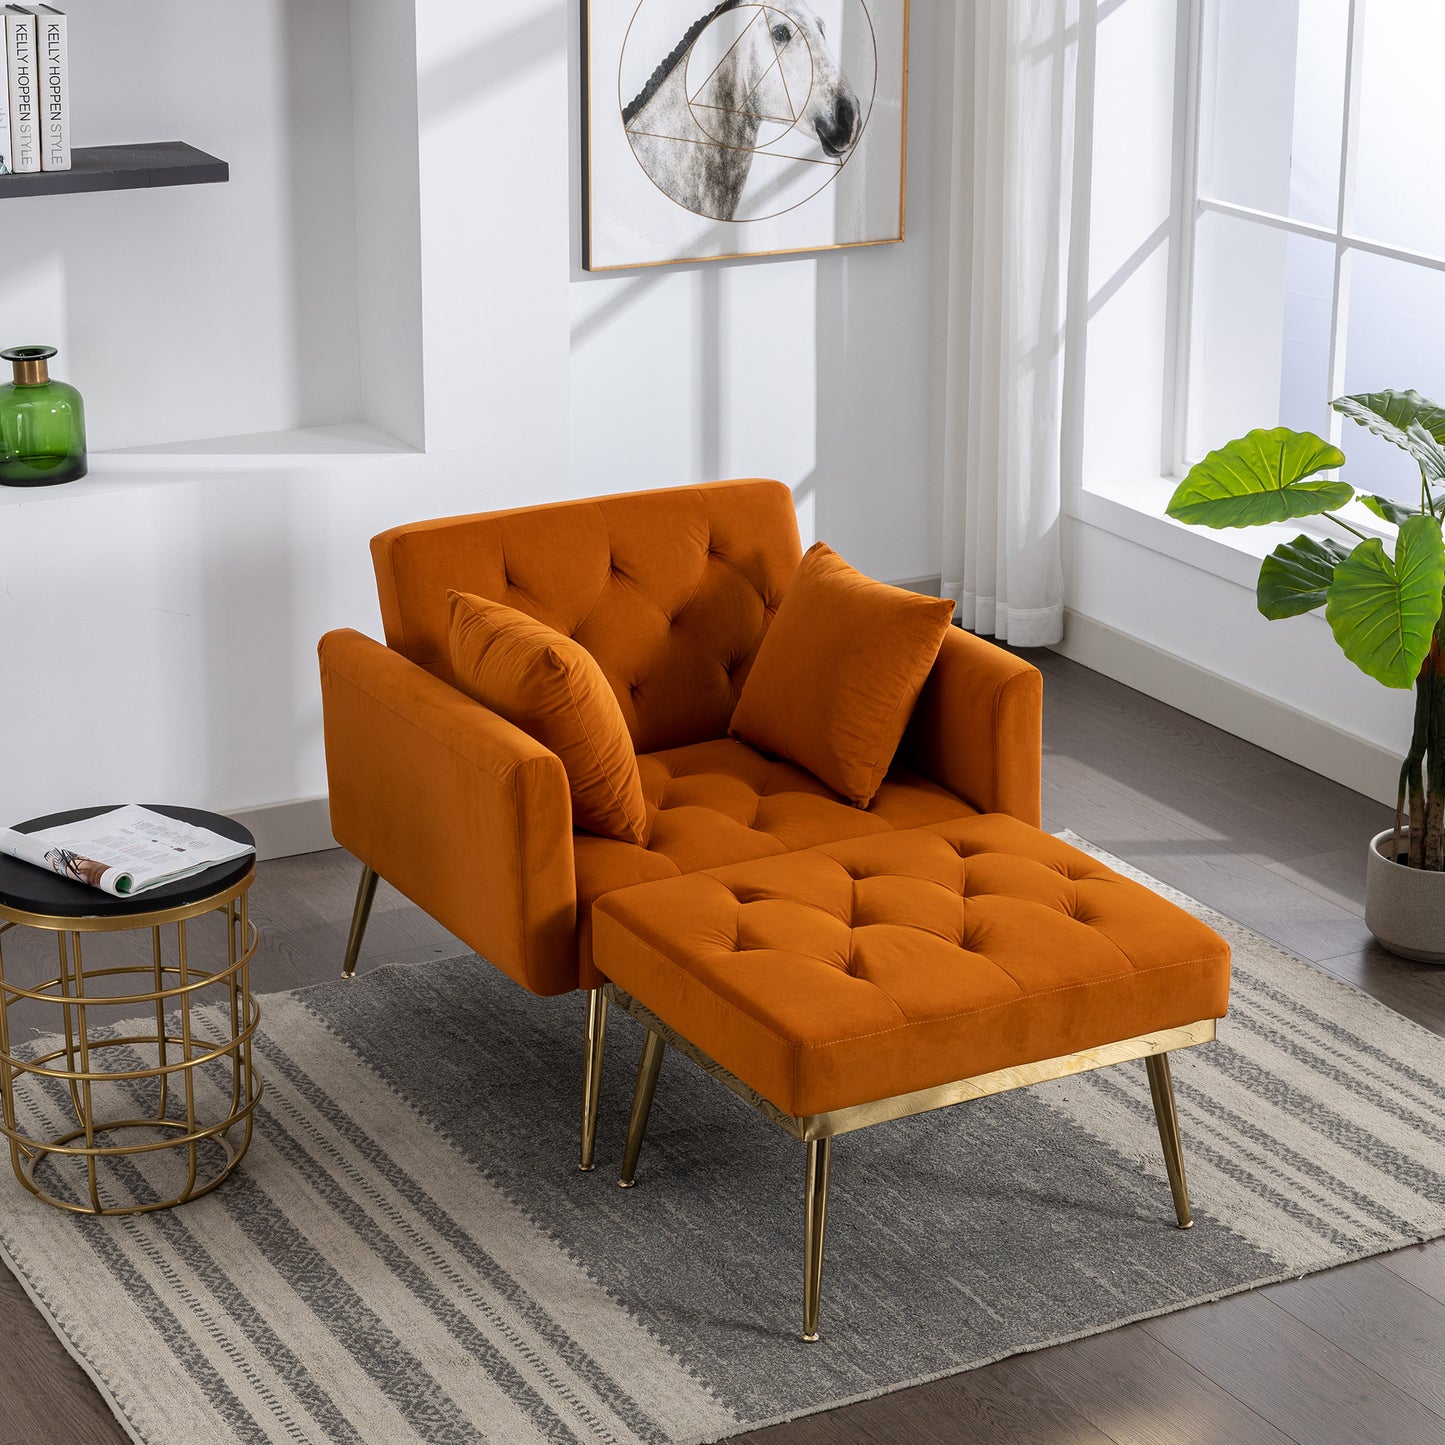 36.61" Wide Modern Accent Chair With 3 Positions Adjustable Backrest, Tufted Chaise Lounge Chair, Single Recliner Armchair With Ottoman And Gold Legs For Living Room, Bedroom (Orange)